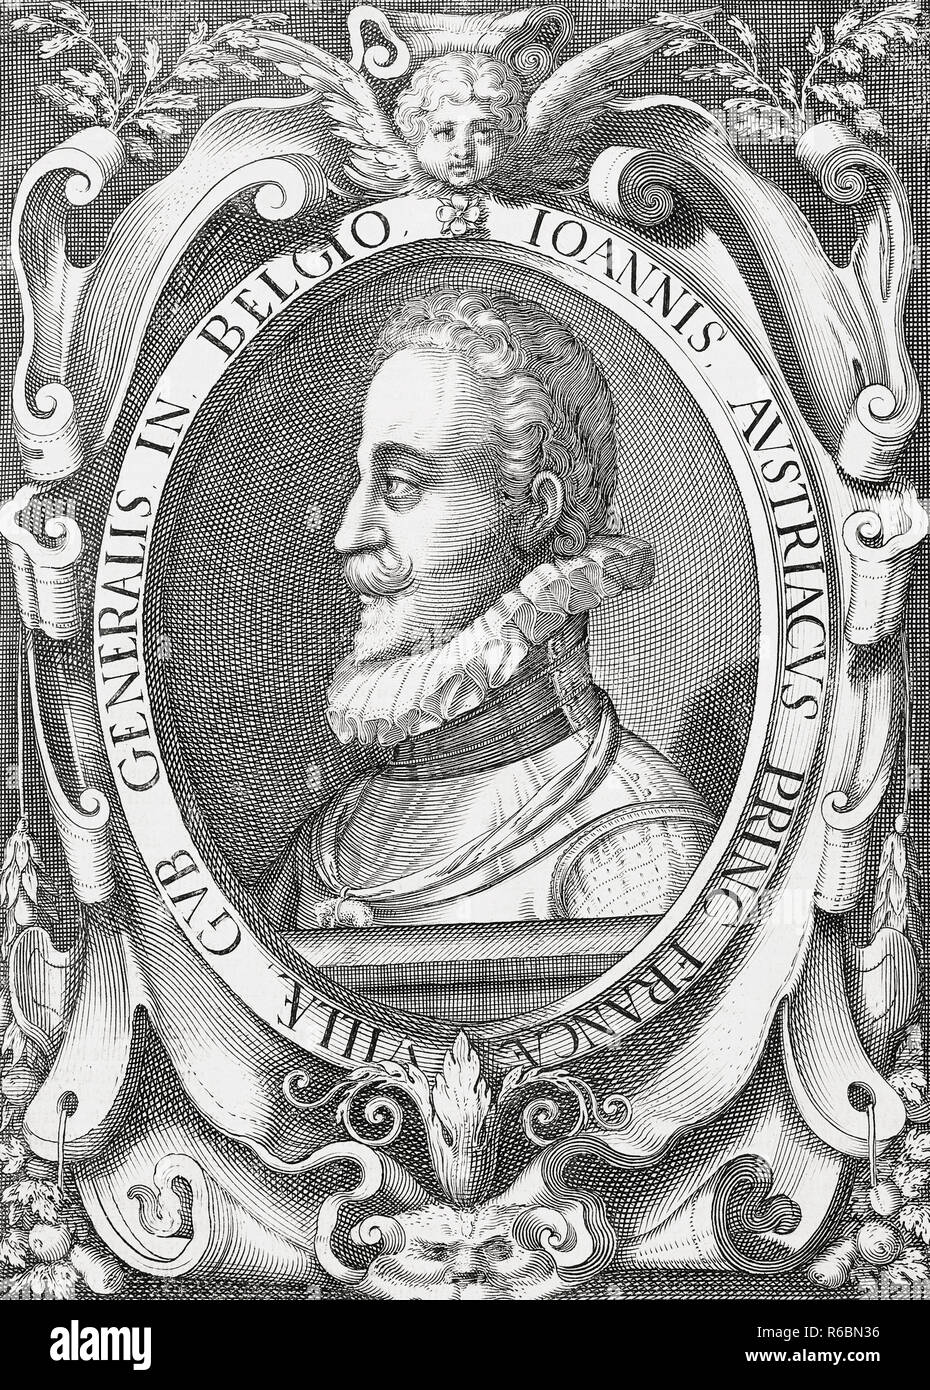 John of Austria (Juan de Austria), 1547-1578.  Illegitimate son of Holy Roman Emperor Charles V.  Military leader in the service of his half-brother, King Philip II of Spain. He is best known for his naval victory at the Battle of Lepanto in 1571 against the Ottoman Empire.  After a 17th century engraving. Stock Photo